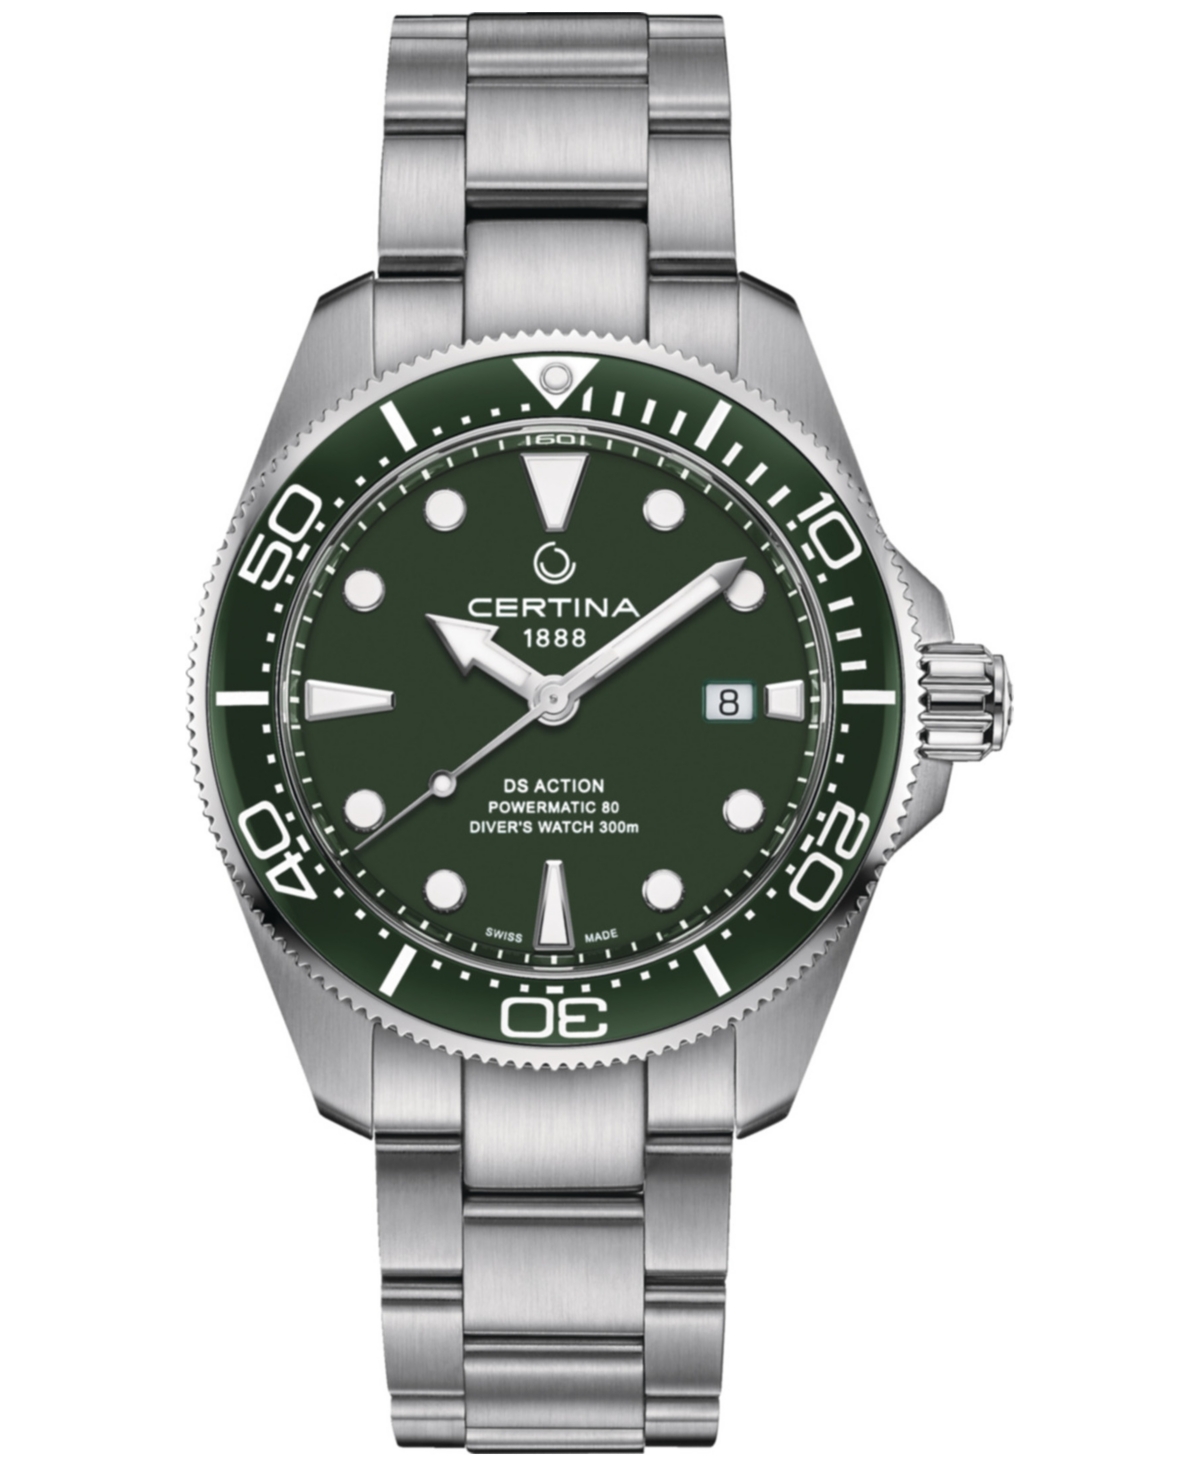 Men's Swiss Automatic Ds Action Diver Stainless Steel Bracelet Watch 43mm - Green